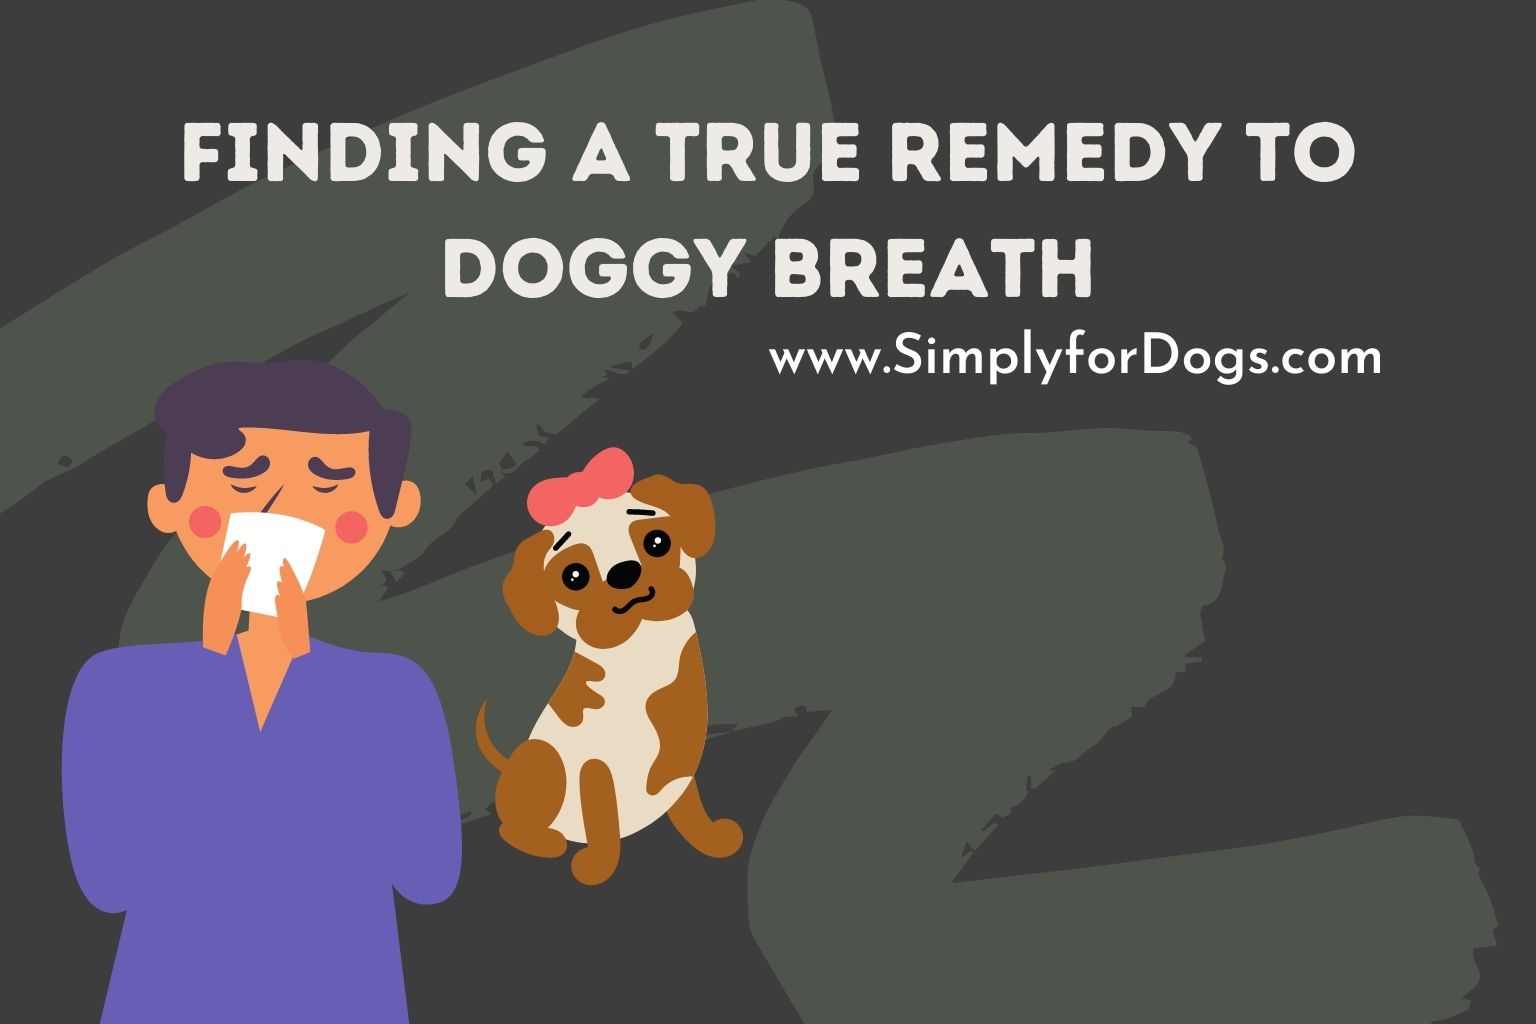 Finding a True Remedy to Doggy Breath